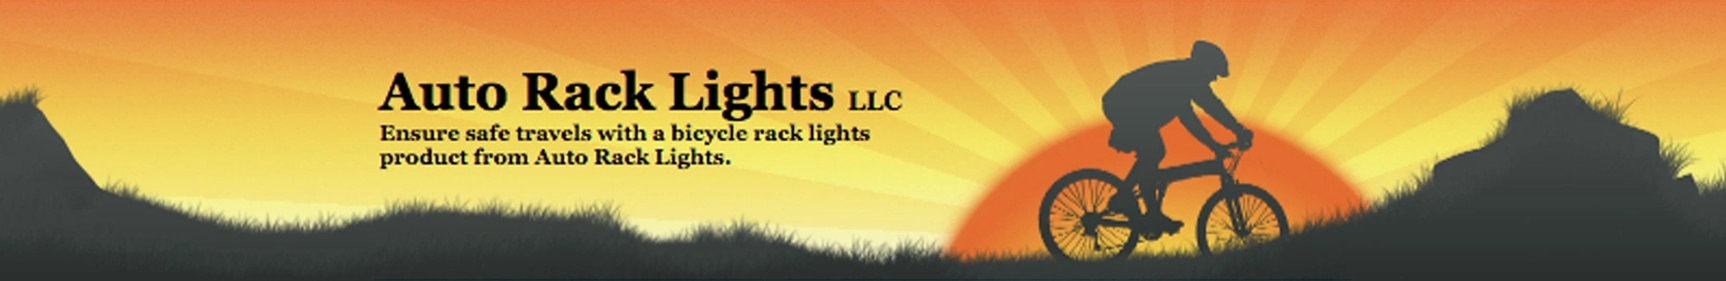 Auto Rack Lights LLC
Ensure safe travels with a bicycl rack light